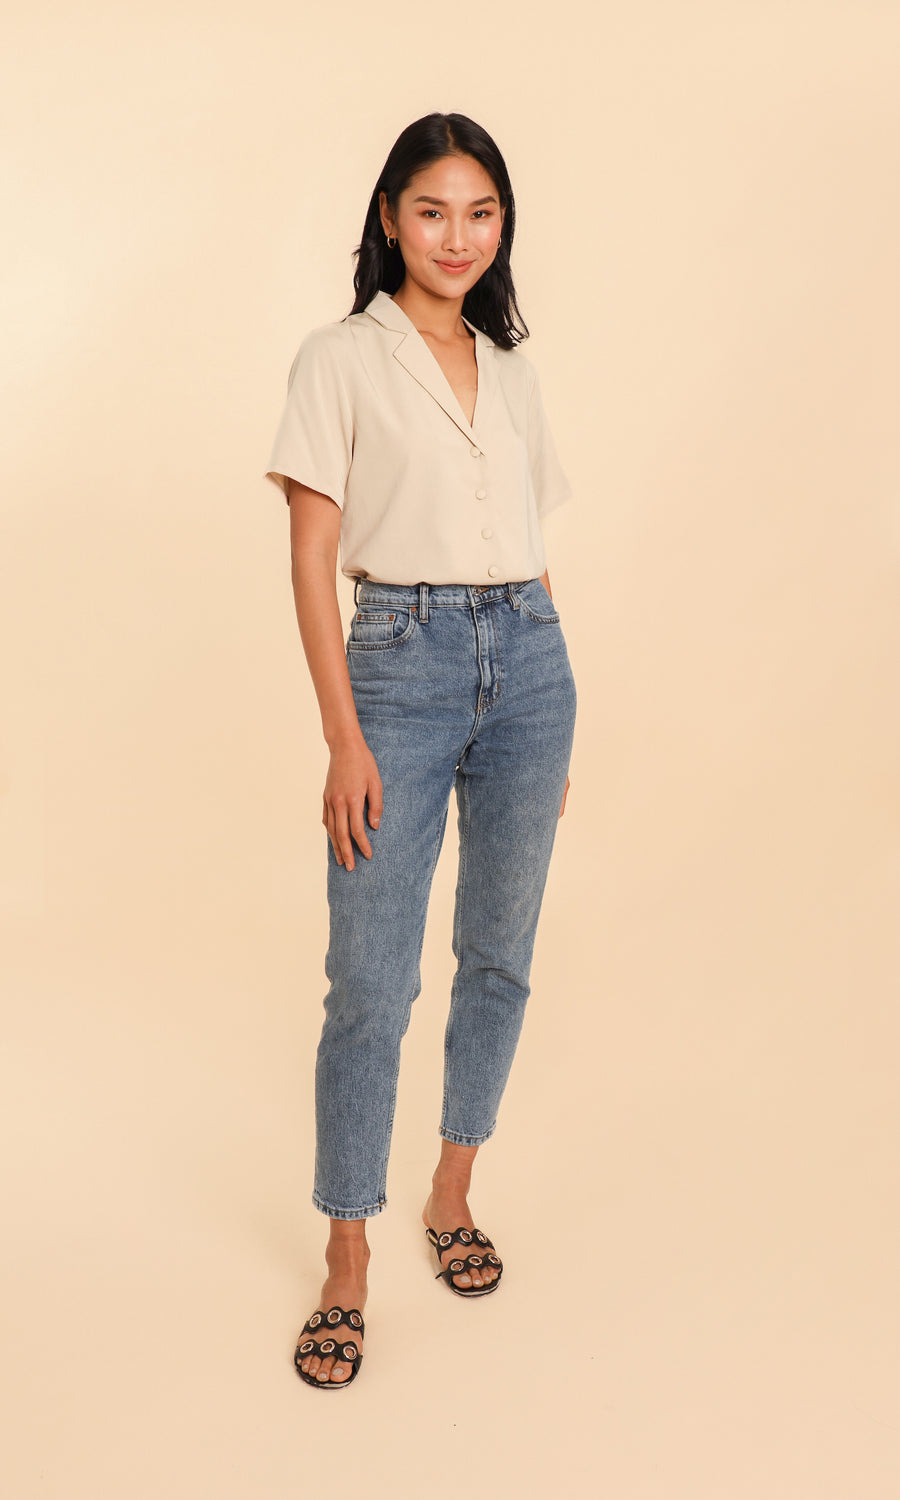 The Billie Cropped Shirt - Champagne